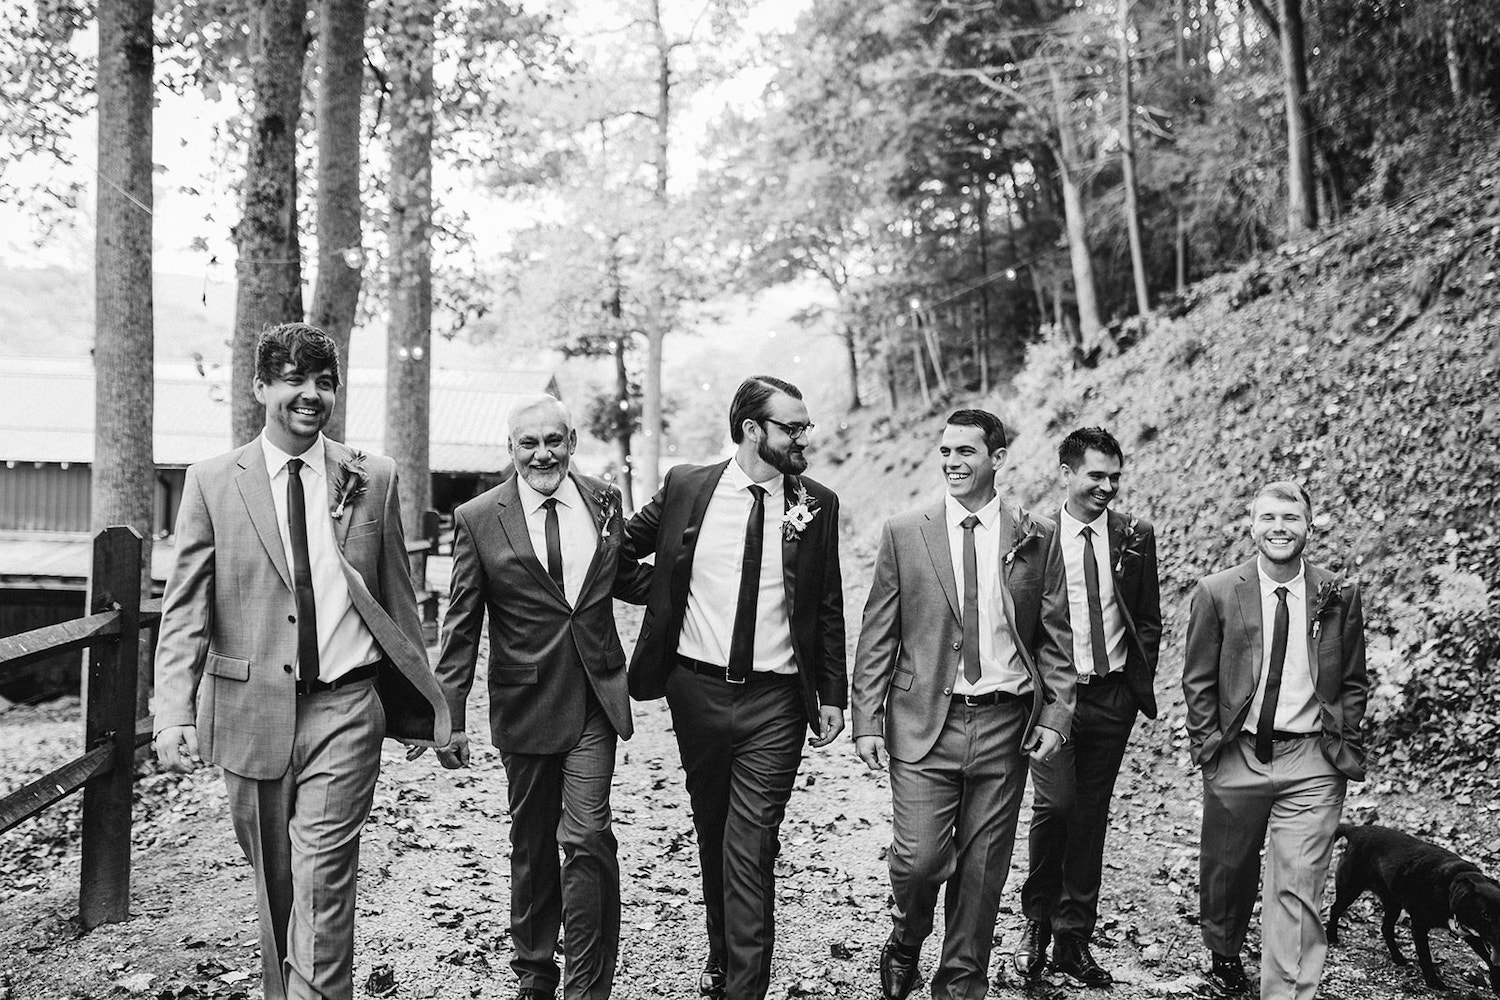 Groom in maroon suit and groomsmen in gray suits walk down a gravel path under tall trees